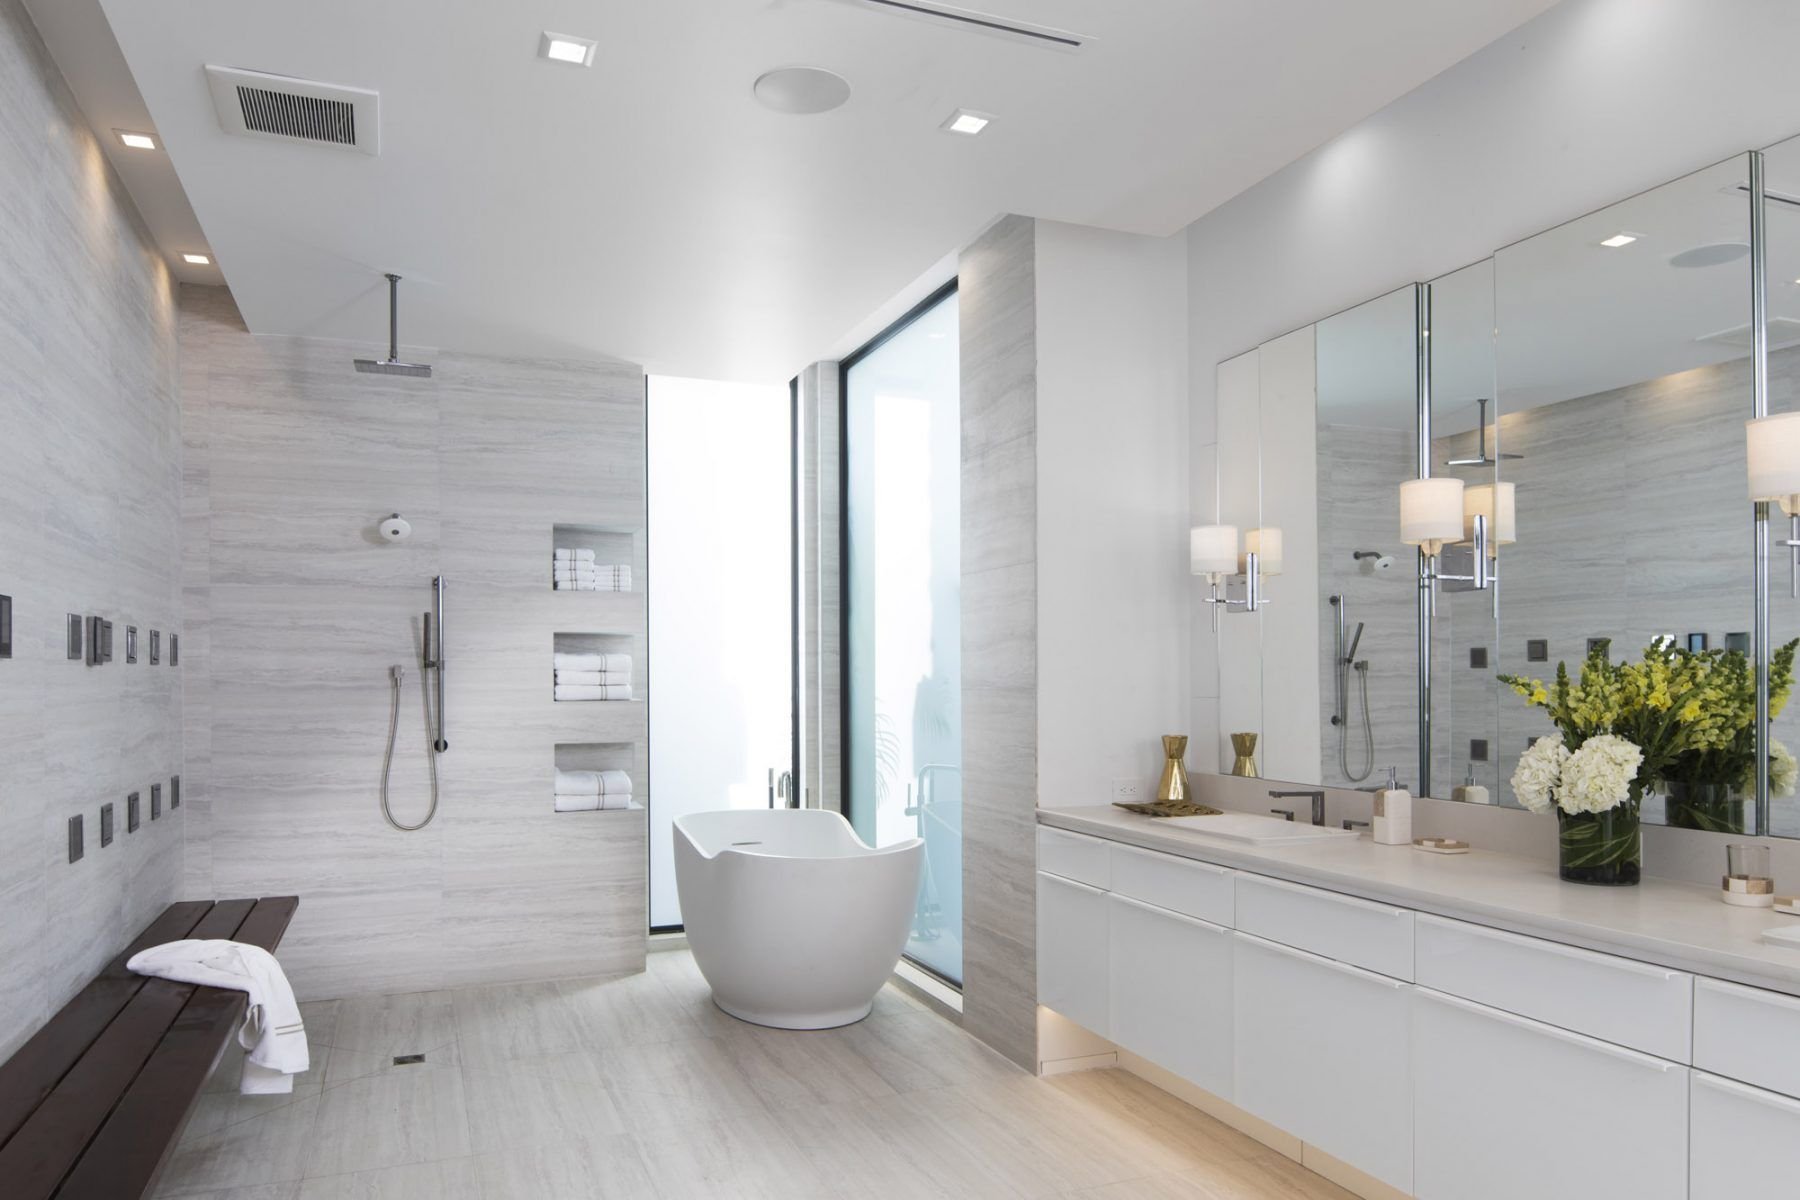 6 Bathroom Styles To Consider For Your Home — HOMEstretch